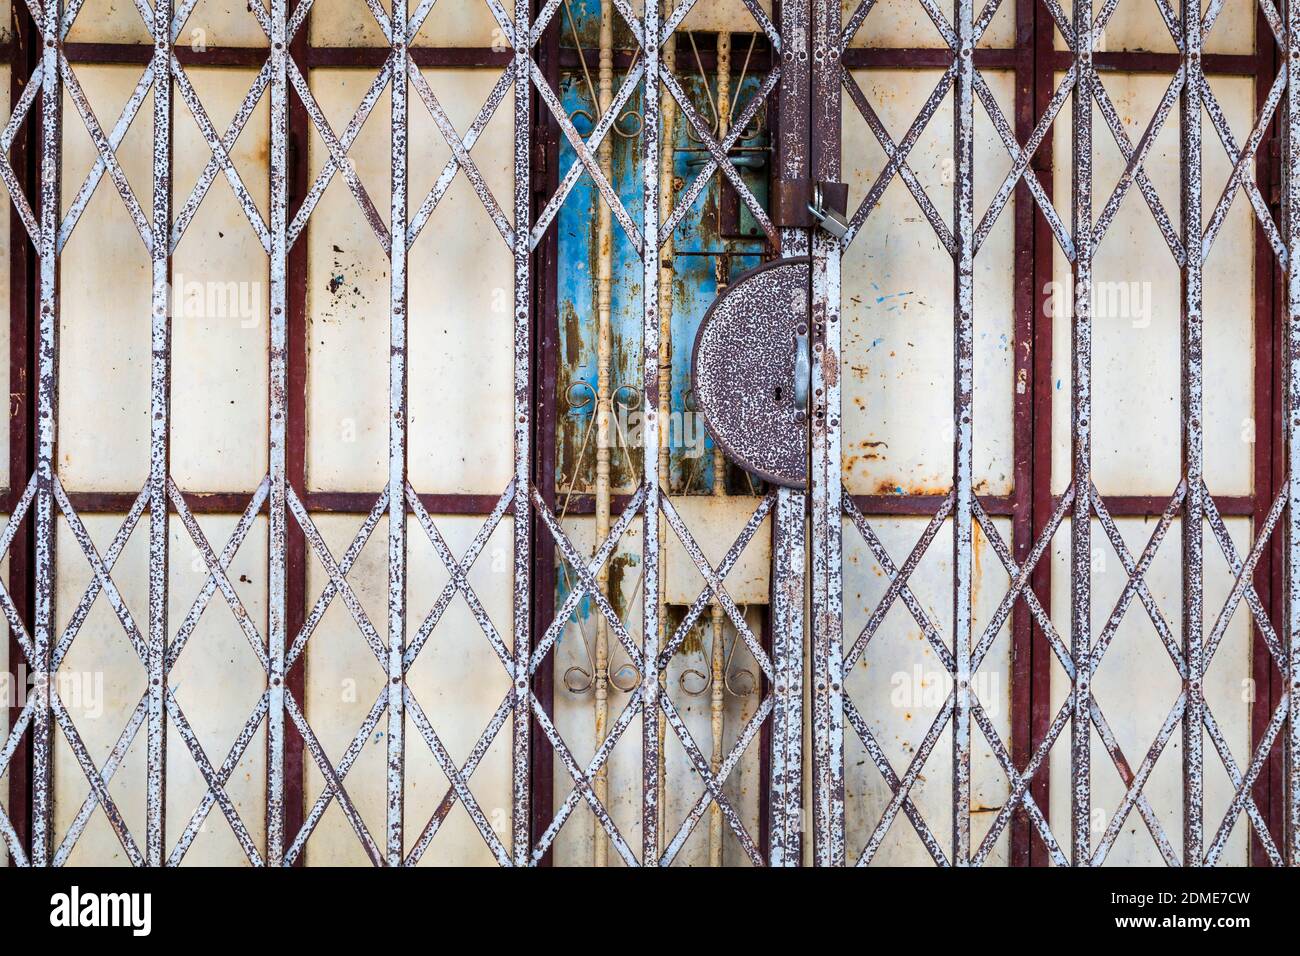 January 10, 2020 -  Alor Setar, Kedah, Malaysia: Close up detail of an old folding shutter gate in the front of a Perenakan shophouse in the city of A Stock Photo